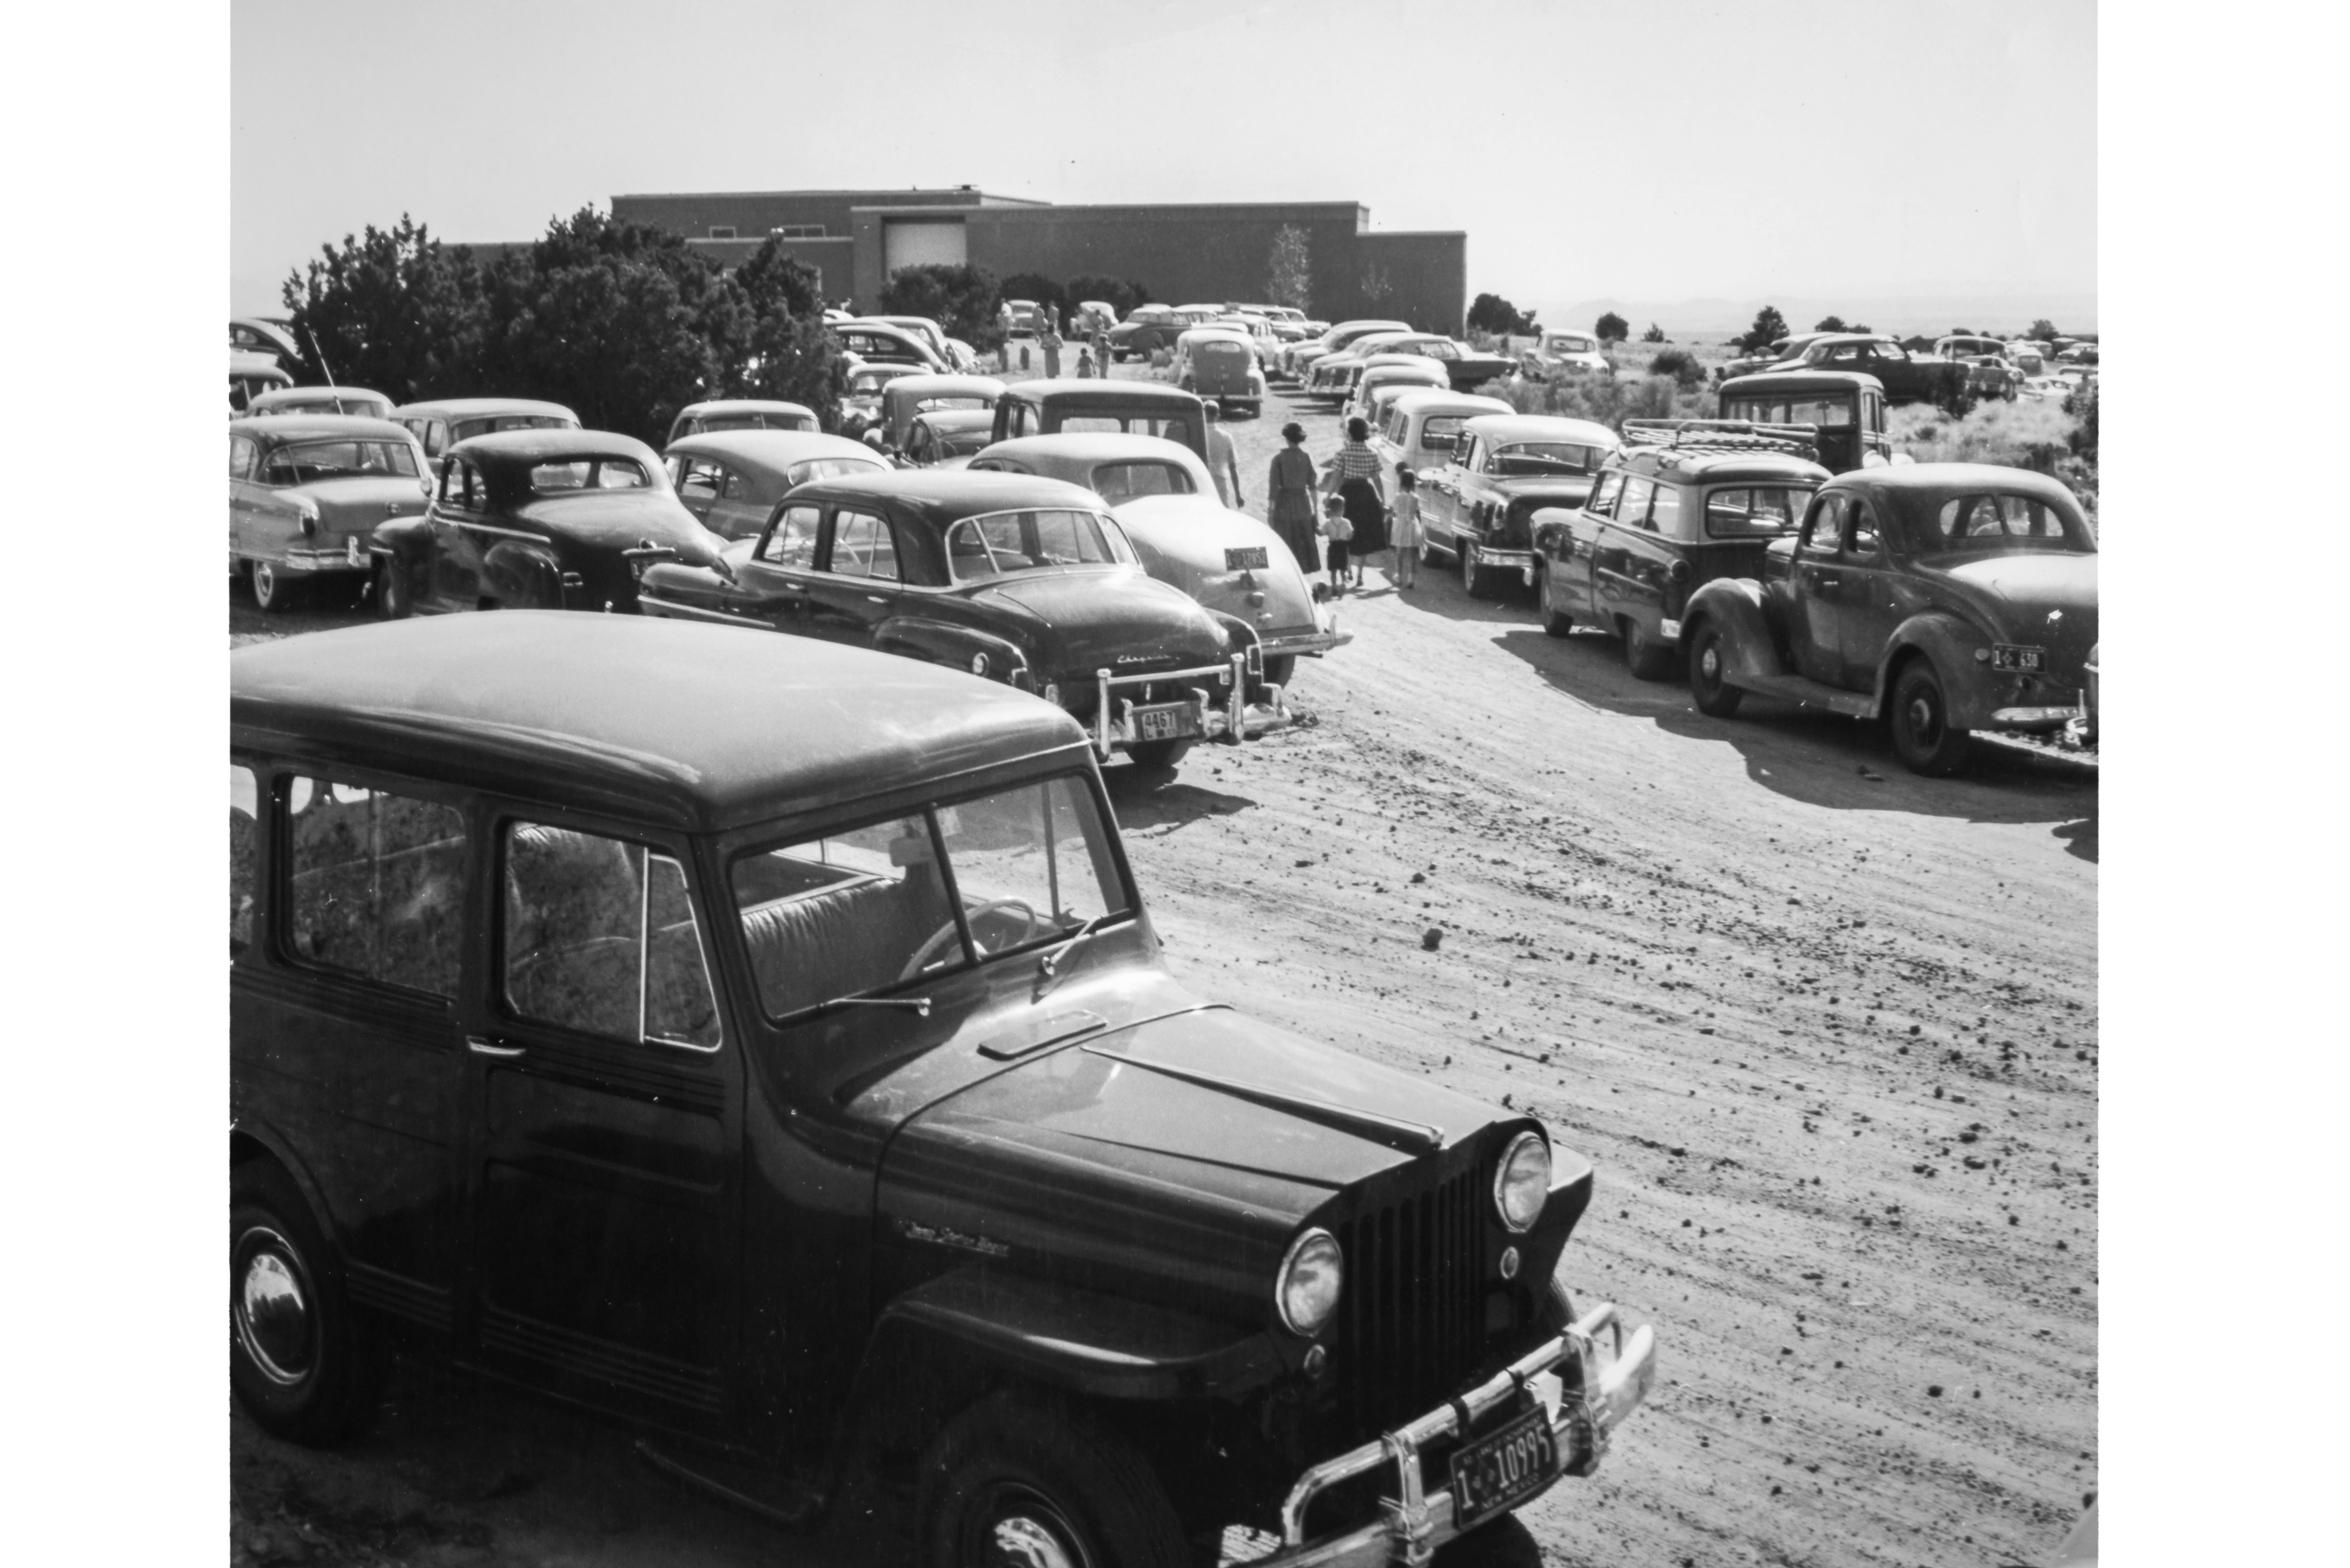 Parking Lot, Opening Day (photographer unknown, 1953)